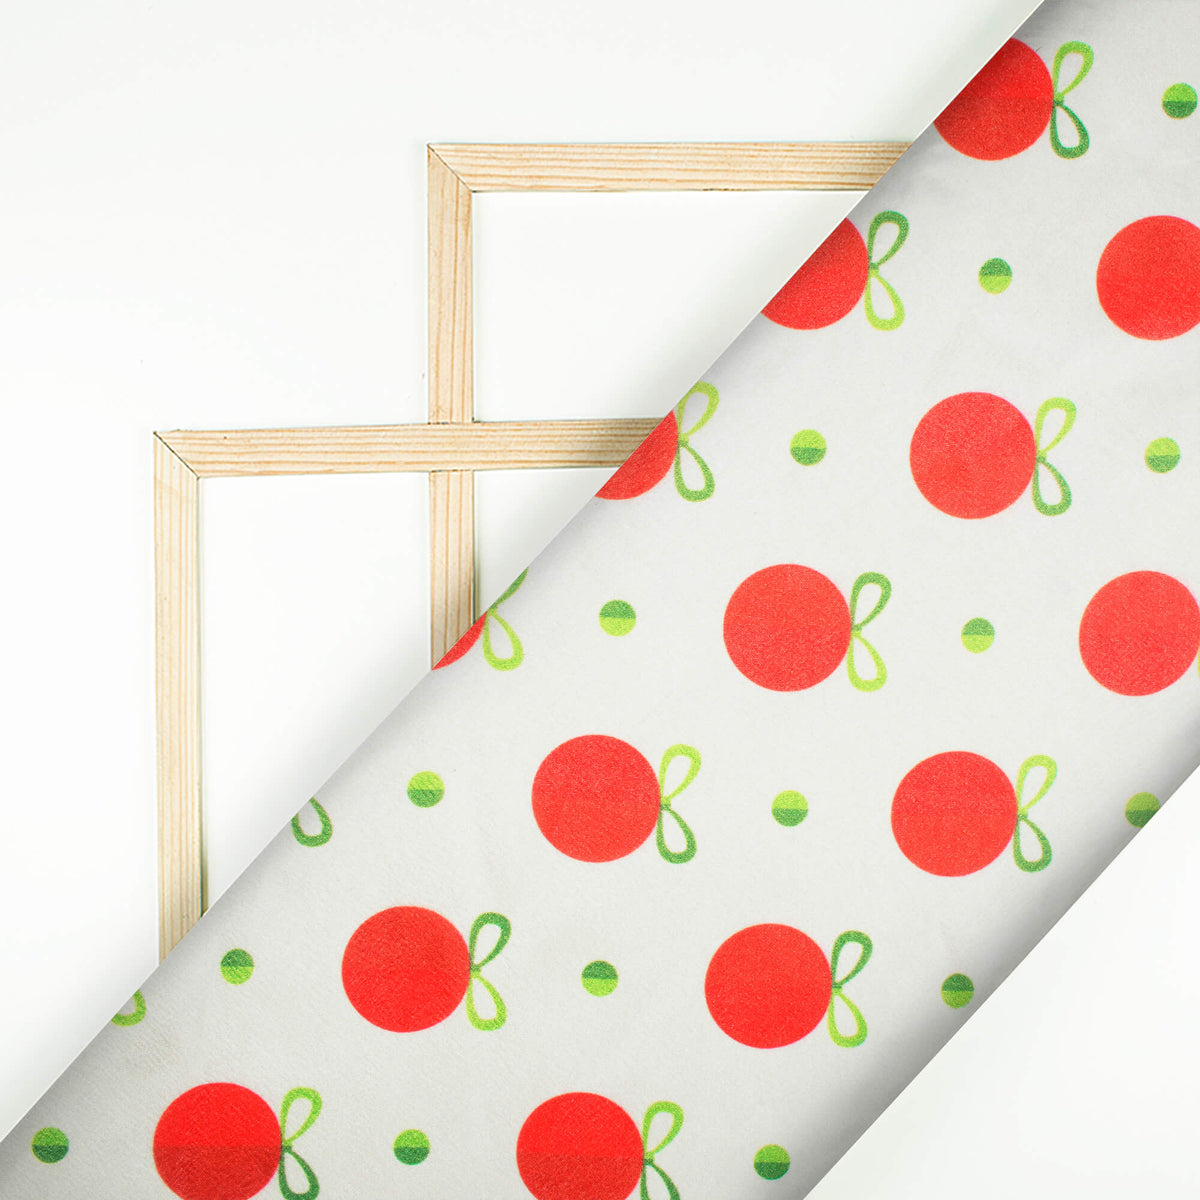 Oyster Cream And Red Christmas Pattern Digital Print Crepe Silk Fabric - Fabcurate